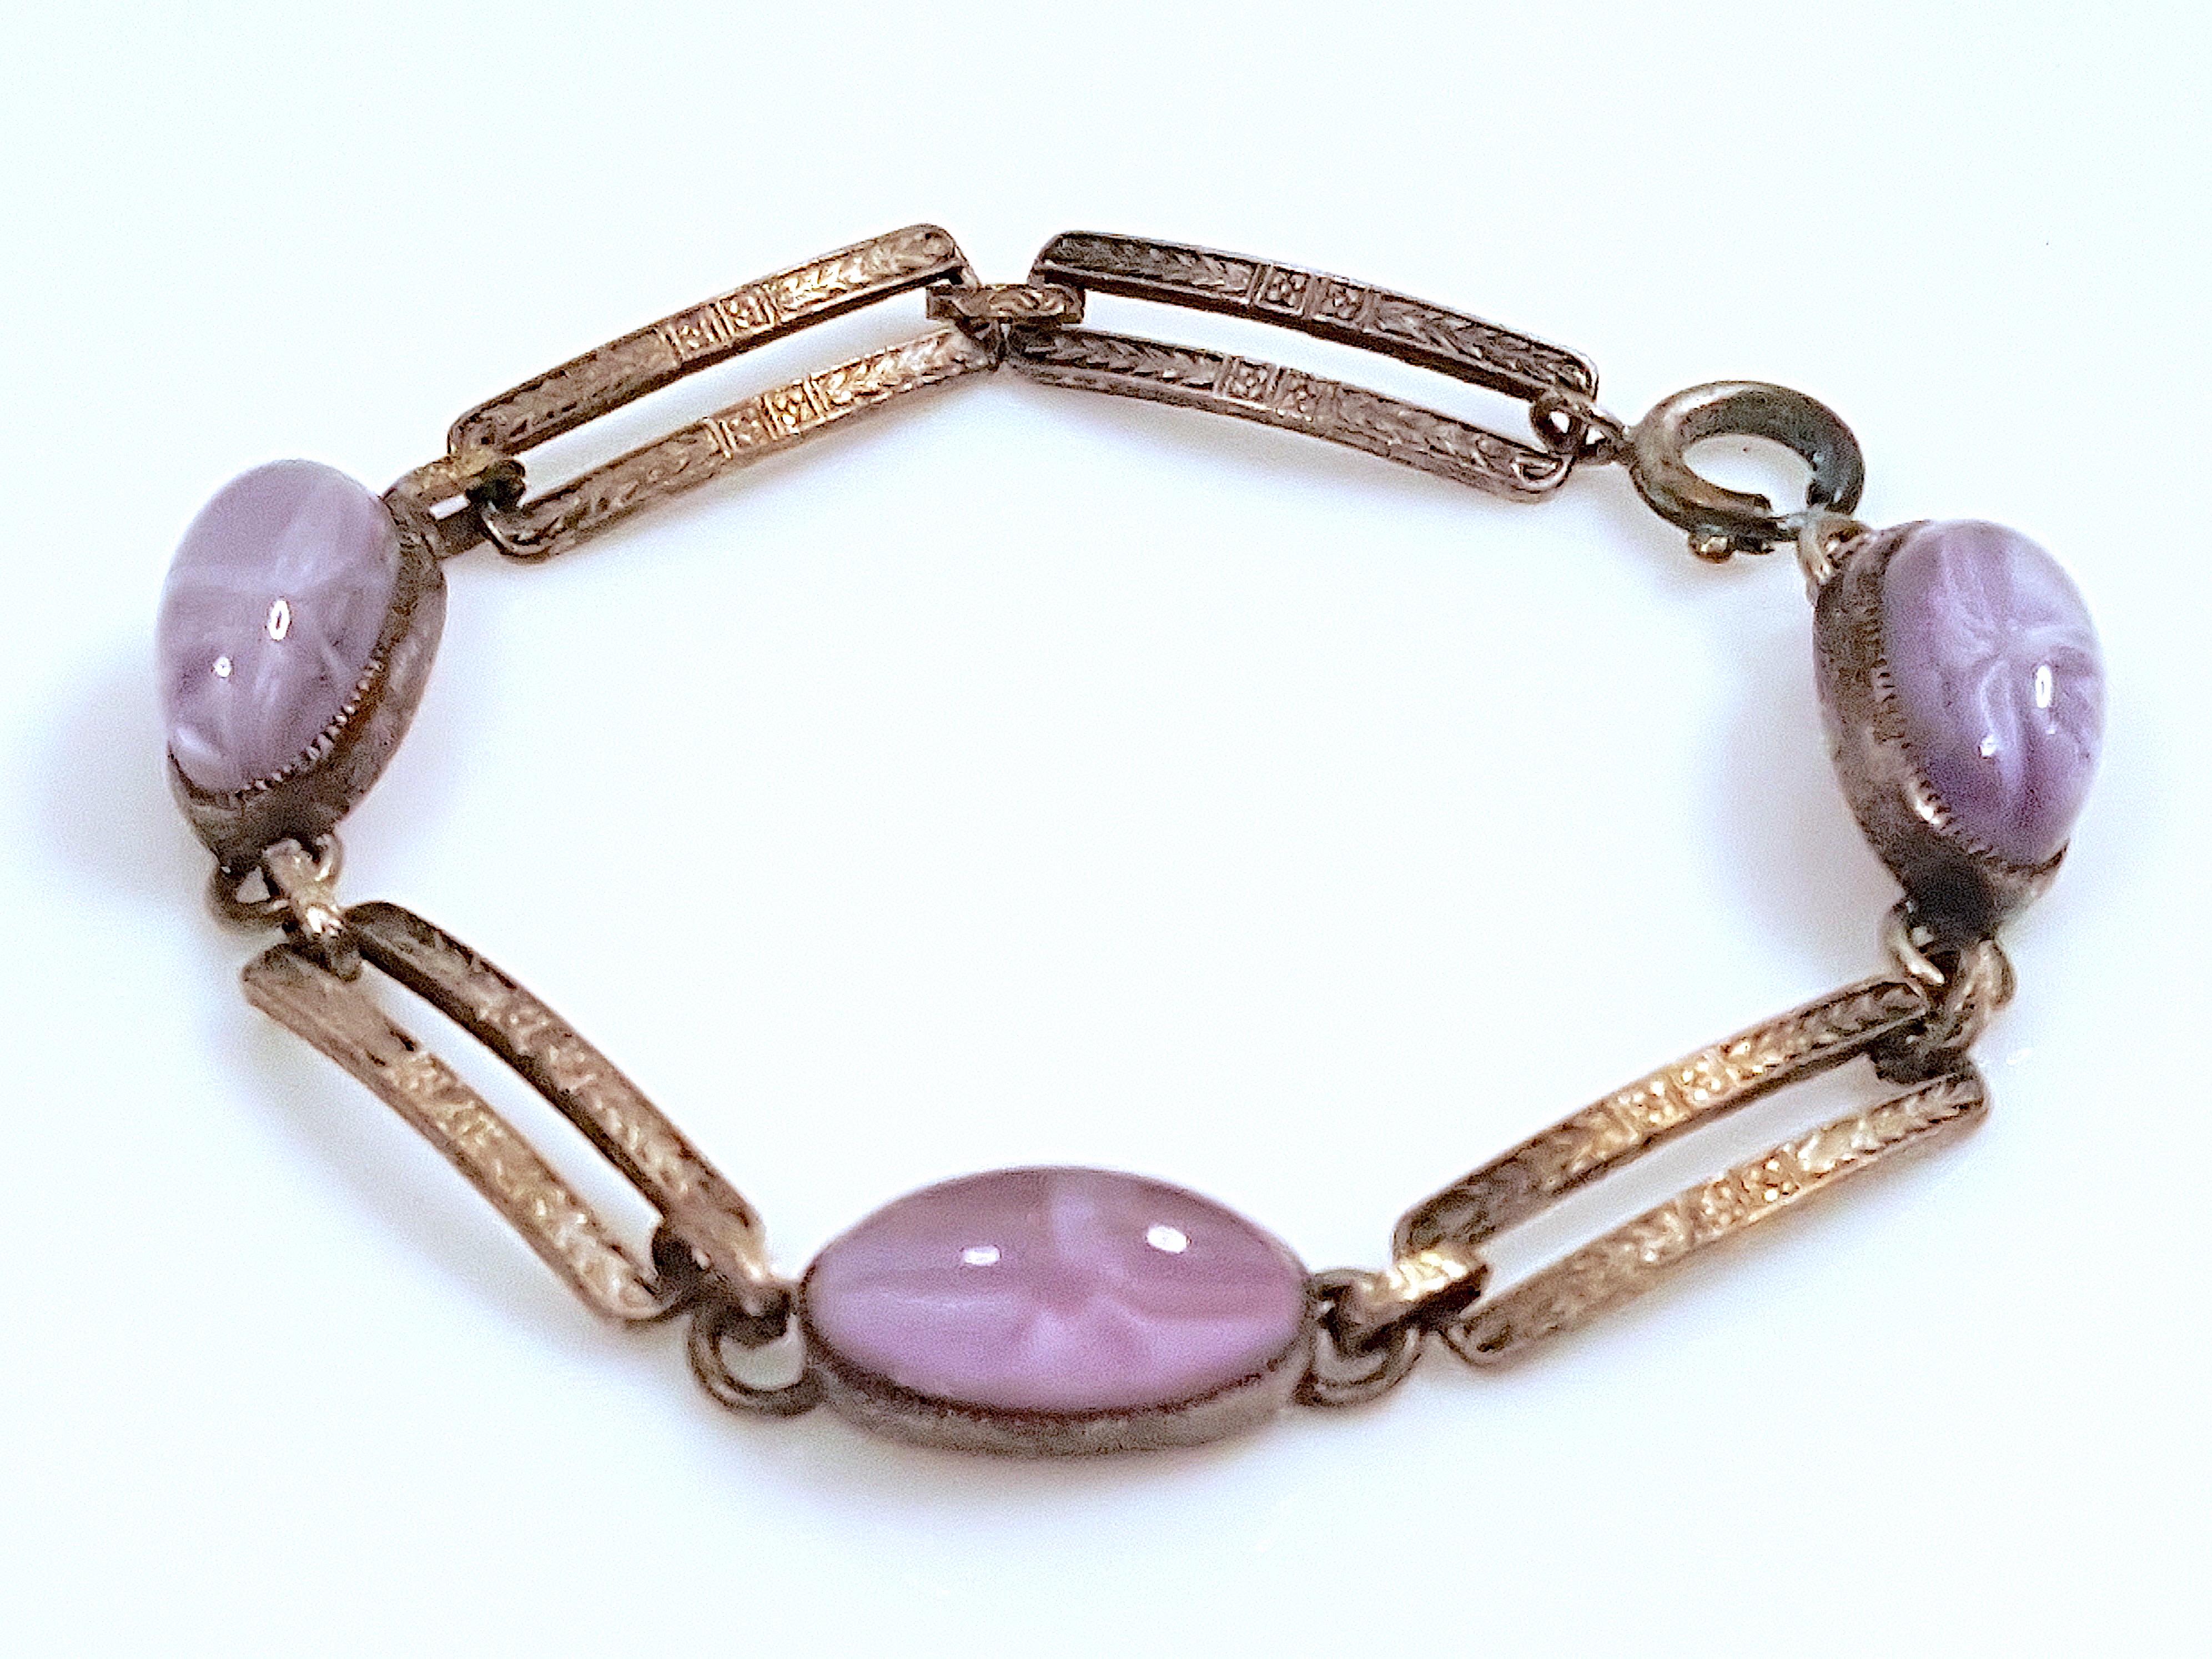 Three violet purple star sapphire high-dome oval cabochons that transition from transparent to opaque are bezel set in this antique white-gold chain link tennis bracelet made during the Belle-Epoque-meets-Art-Deco period. The lavender hues in